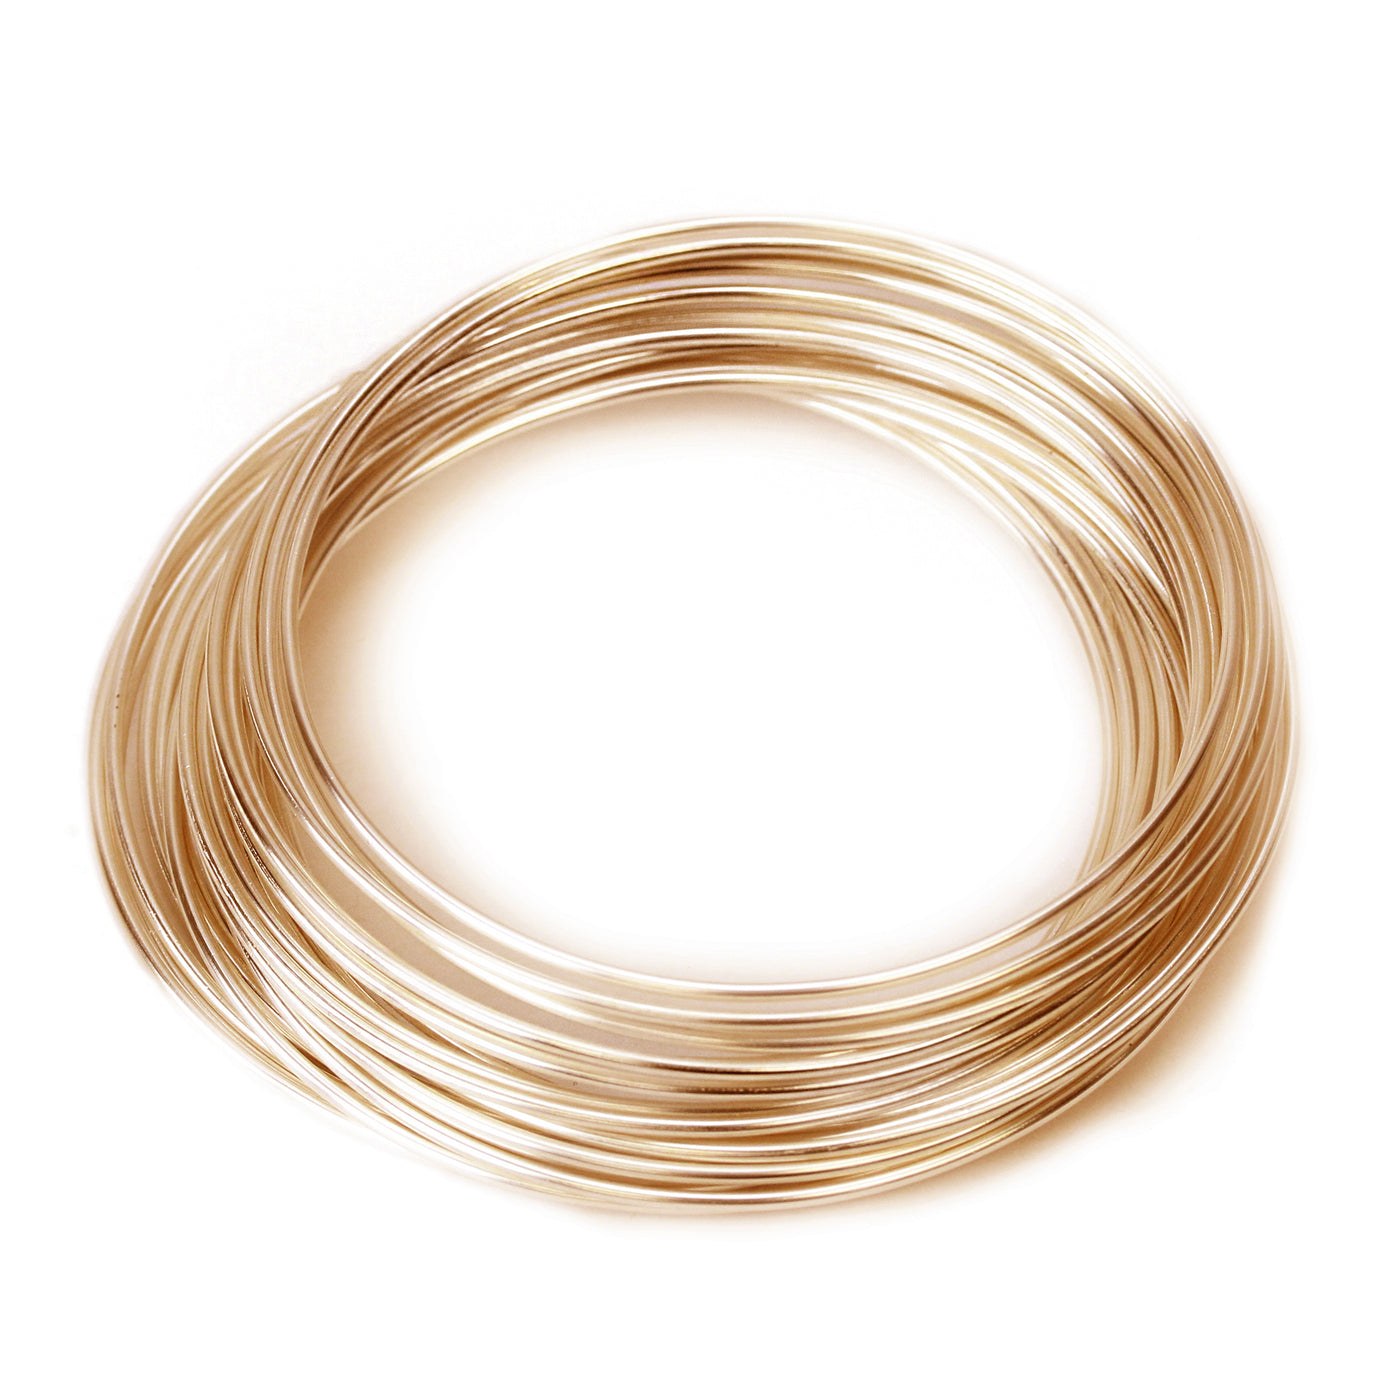 20 Gauge Gold Filled, Round, Dead Soft Wire - 1/4 oz (~5.5 ft) – Beaducation